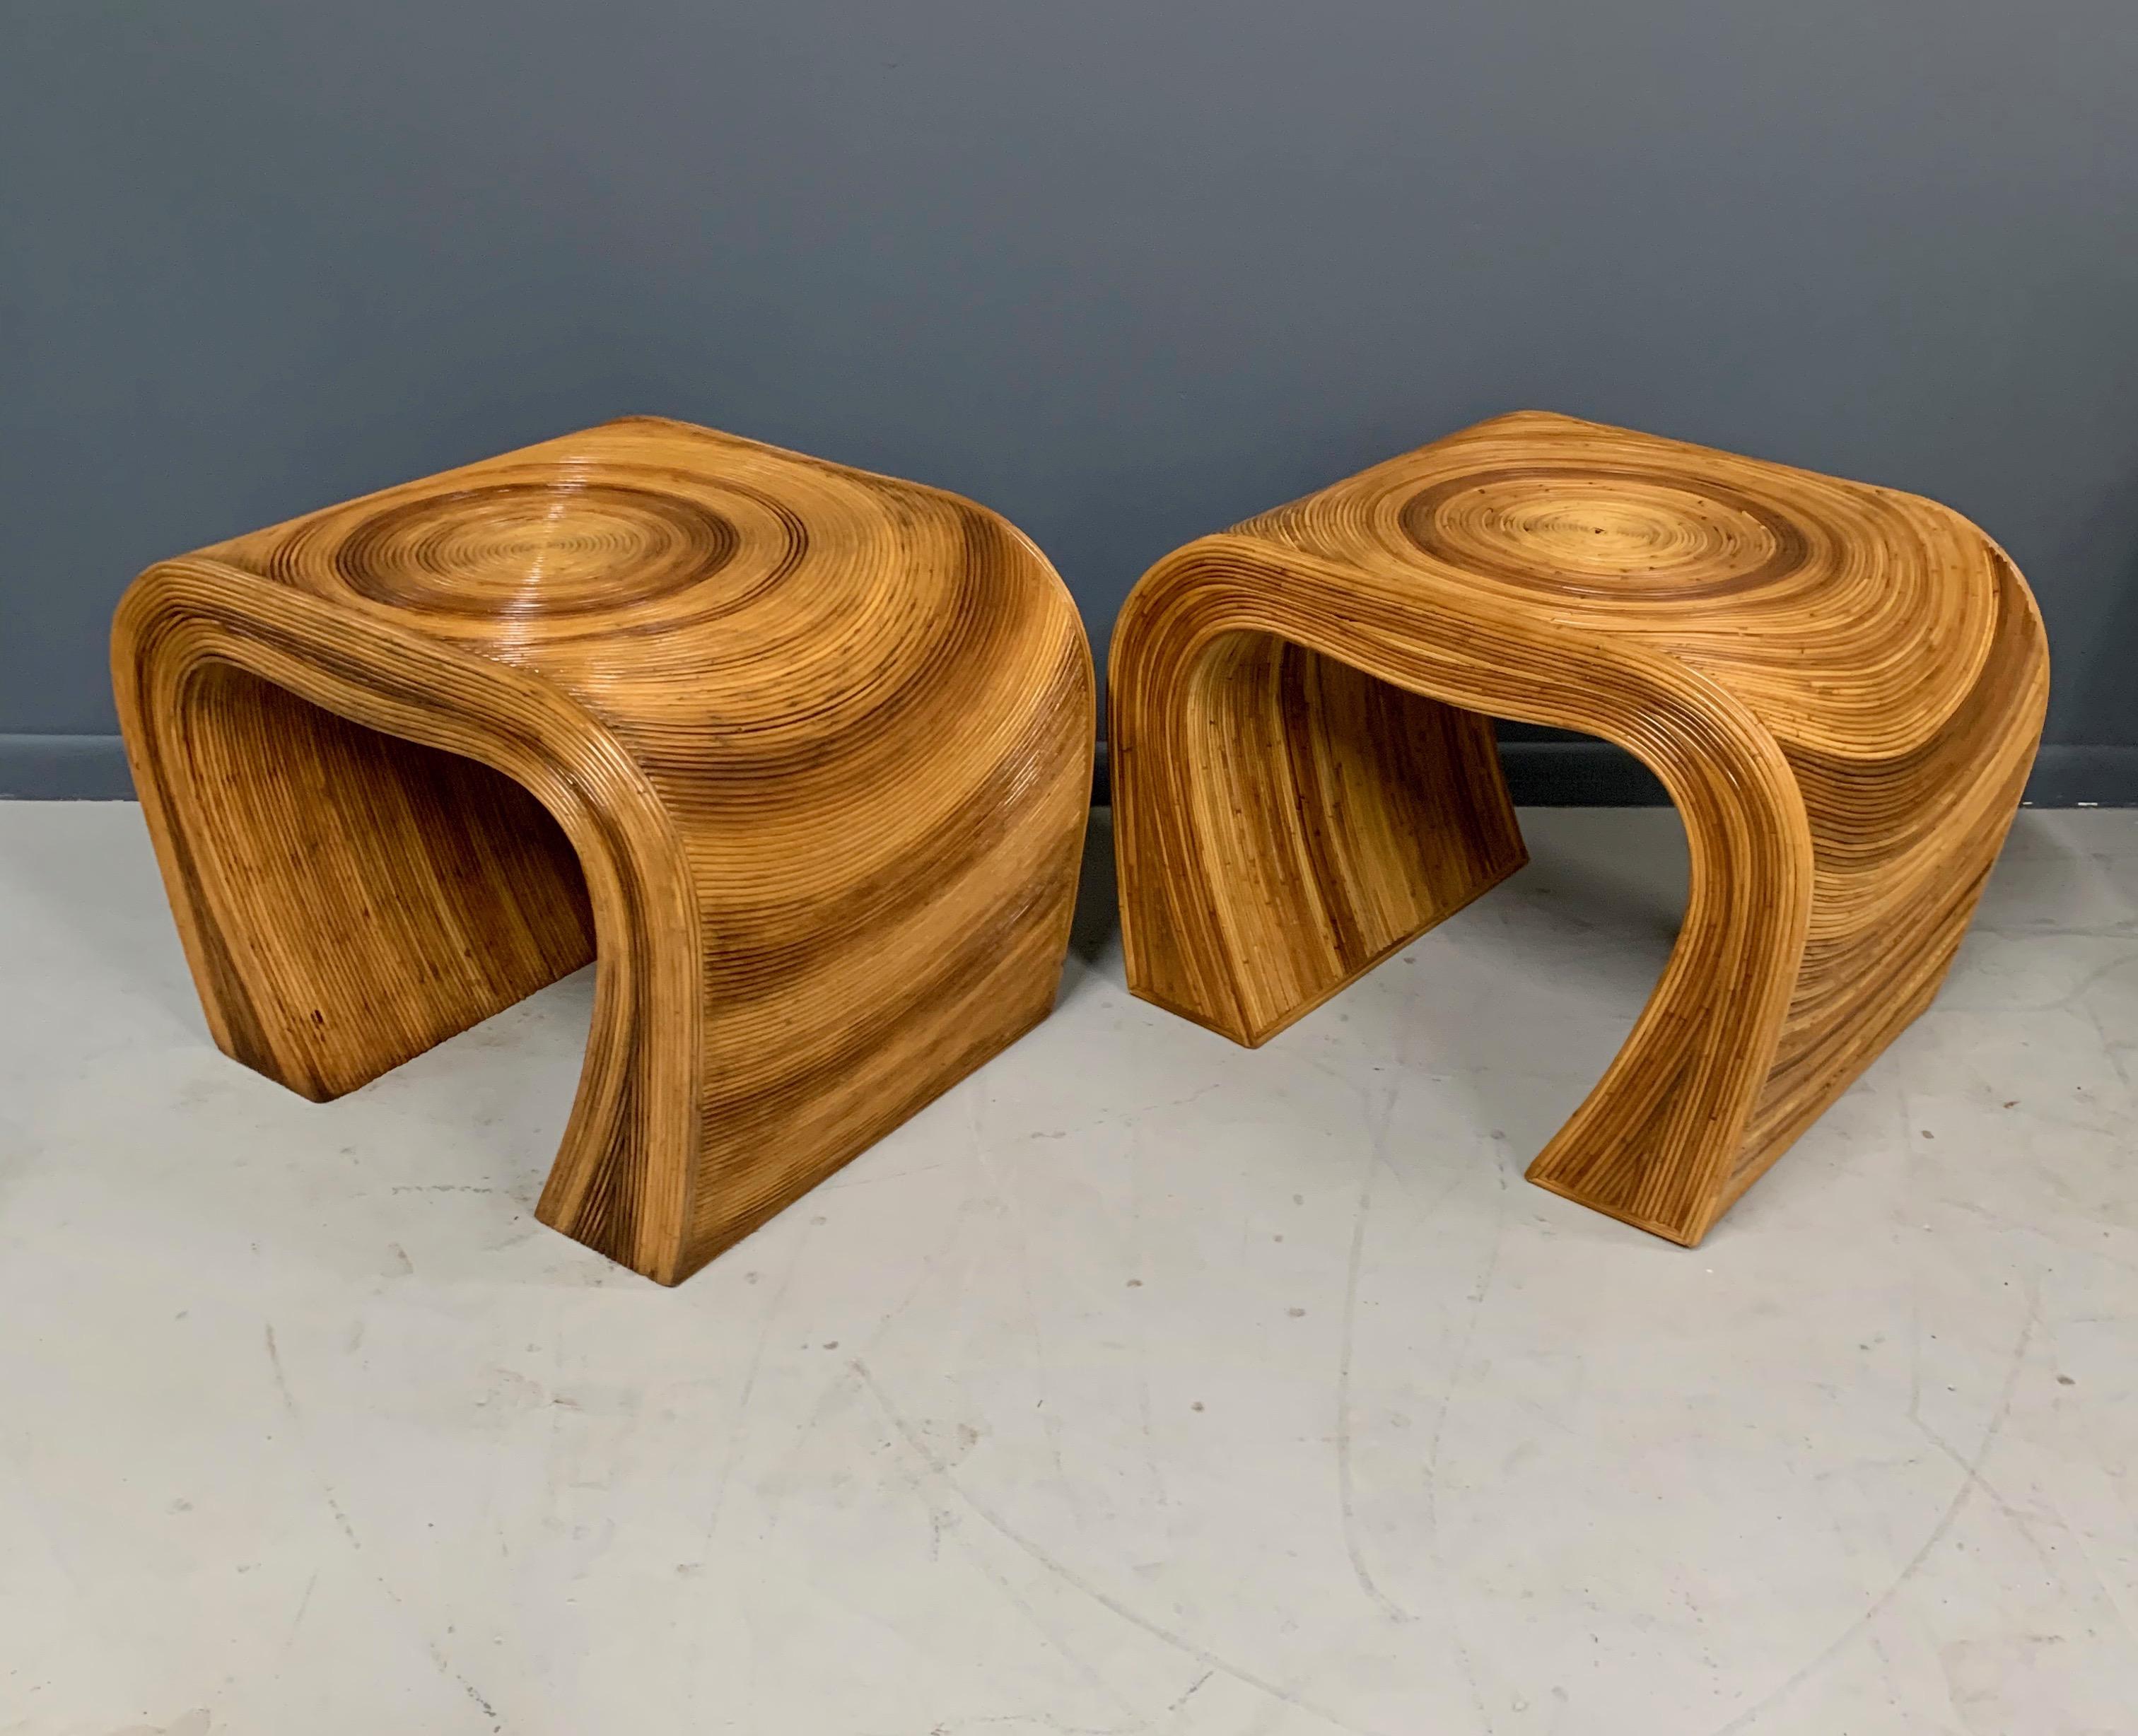 Pencil reed tables in a curved form in wonderful shape.